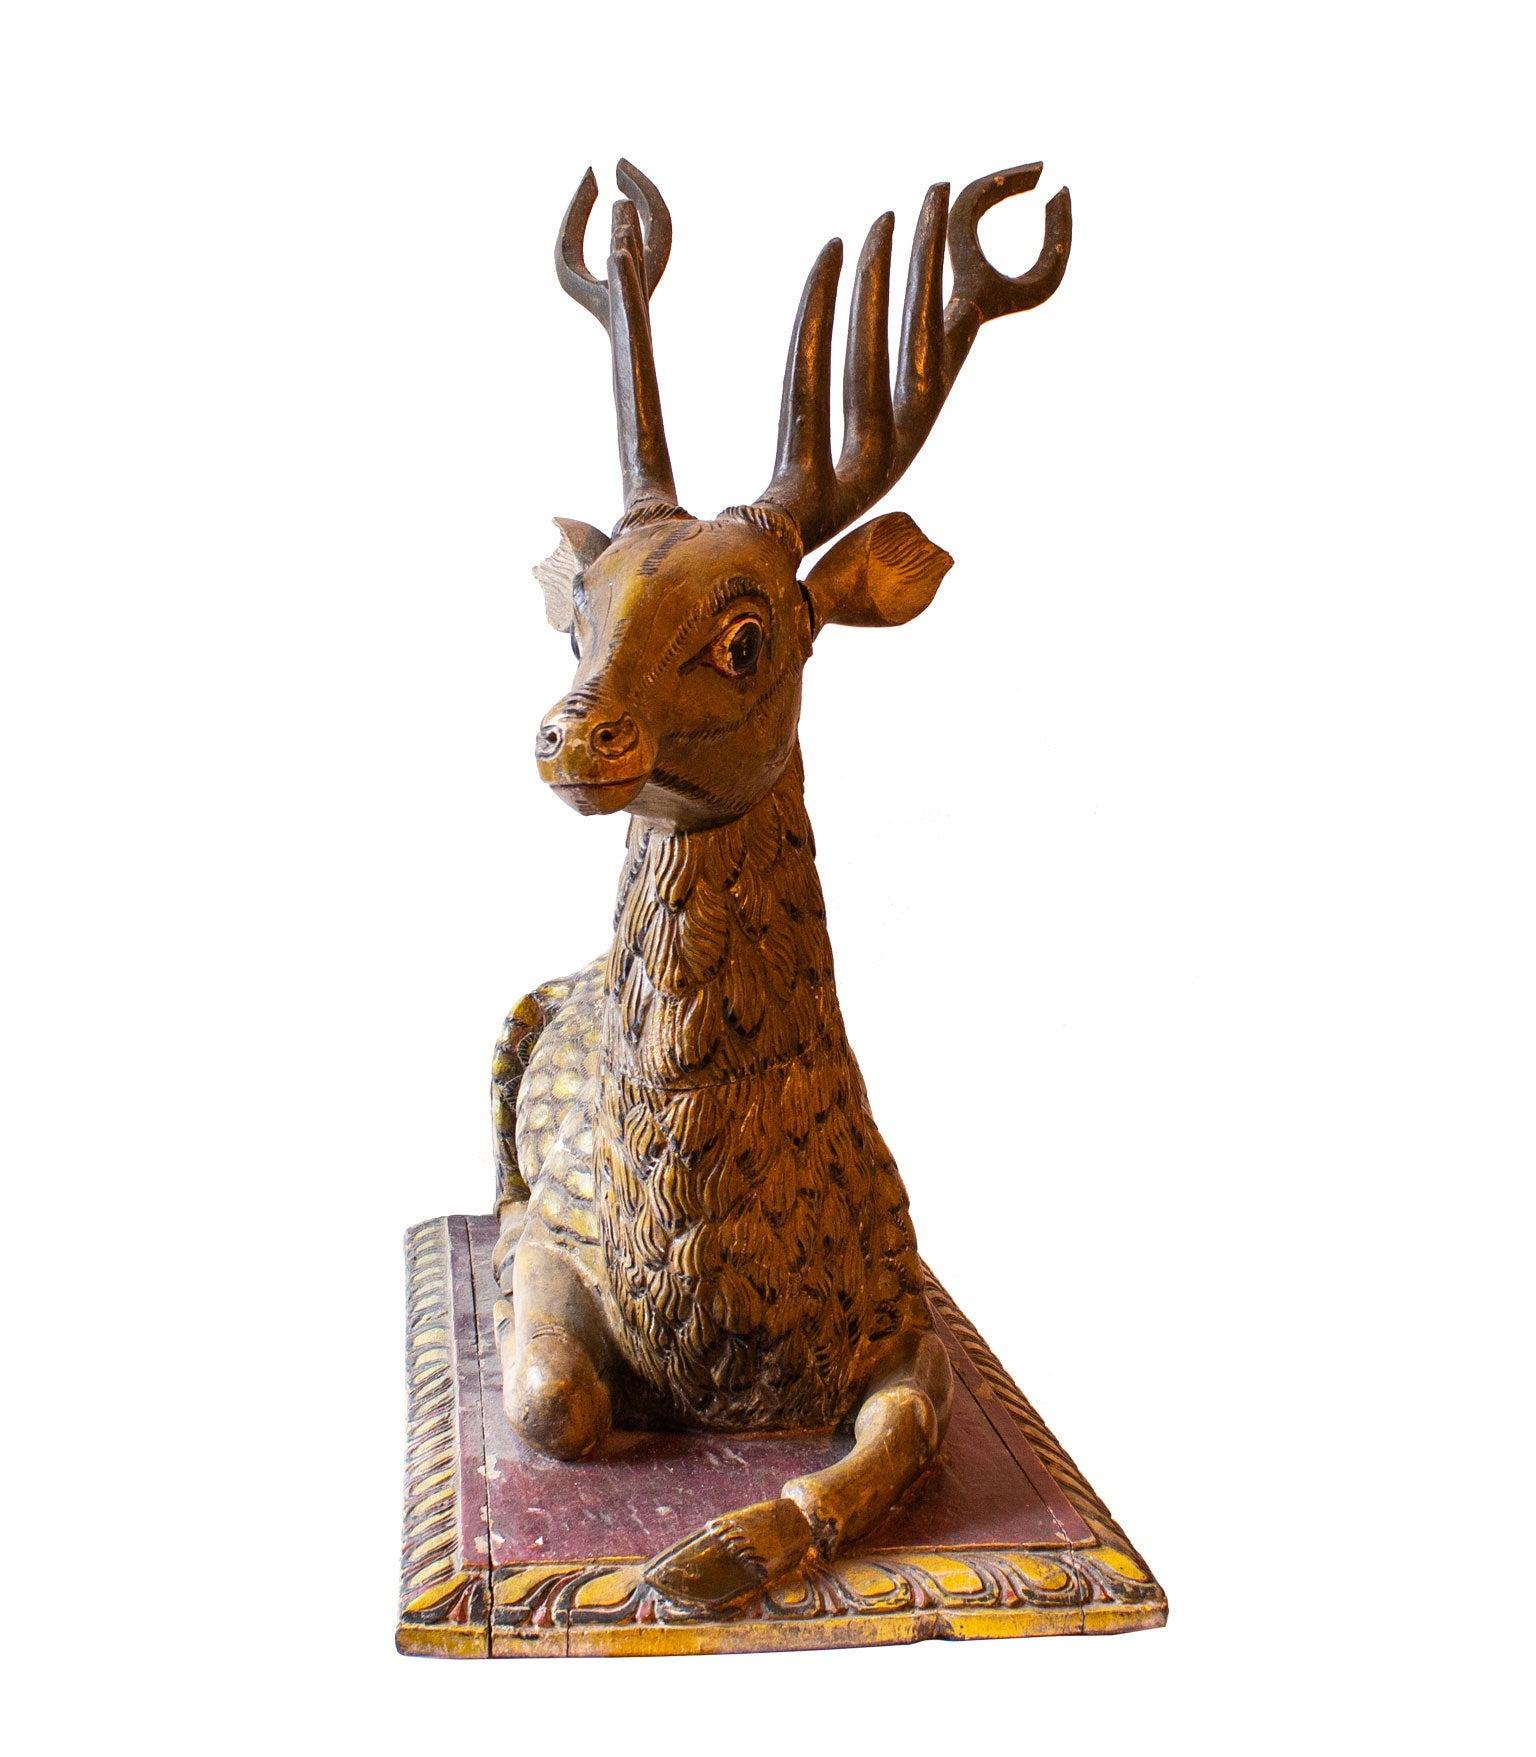 Hand-Carved Big Hand Carved Painted Stag Sculpture in Wood, Early 18th Century For Sale